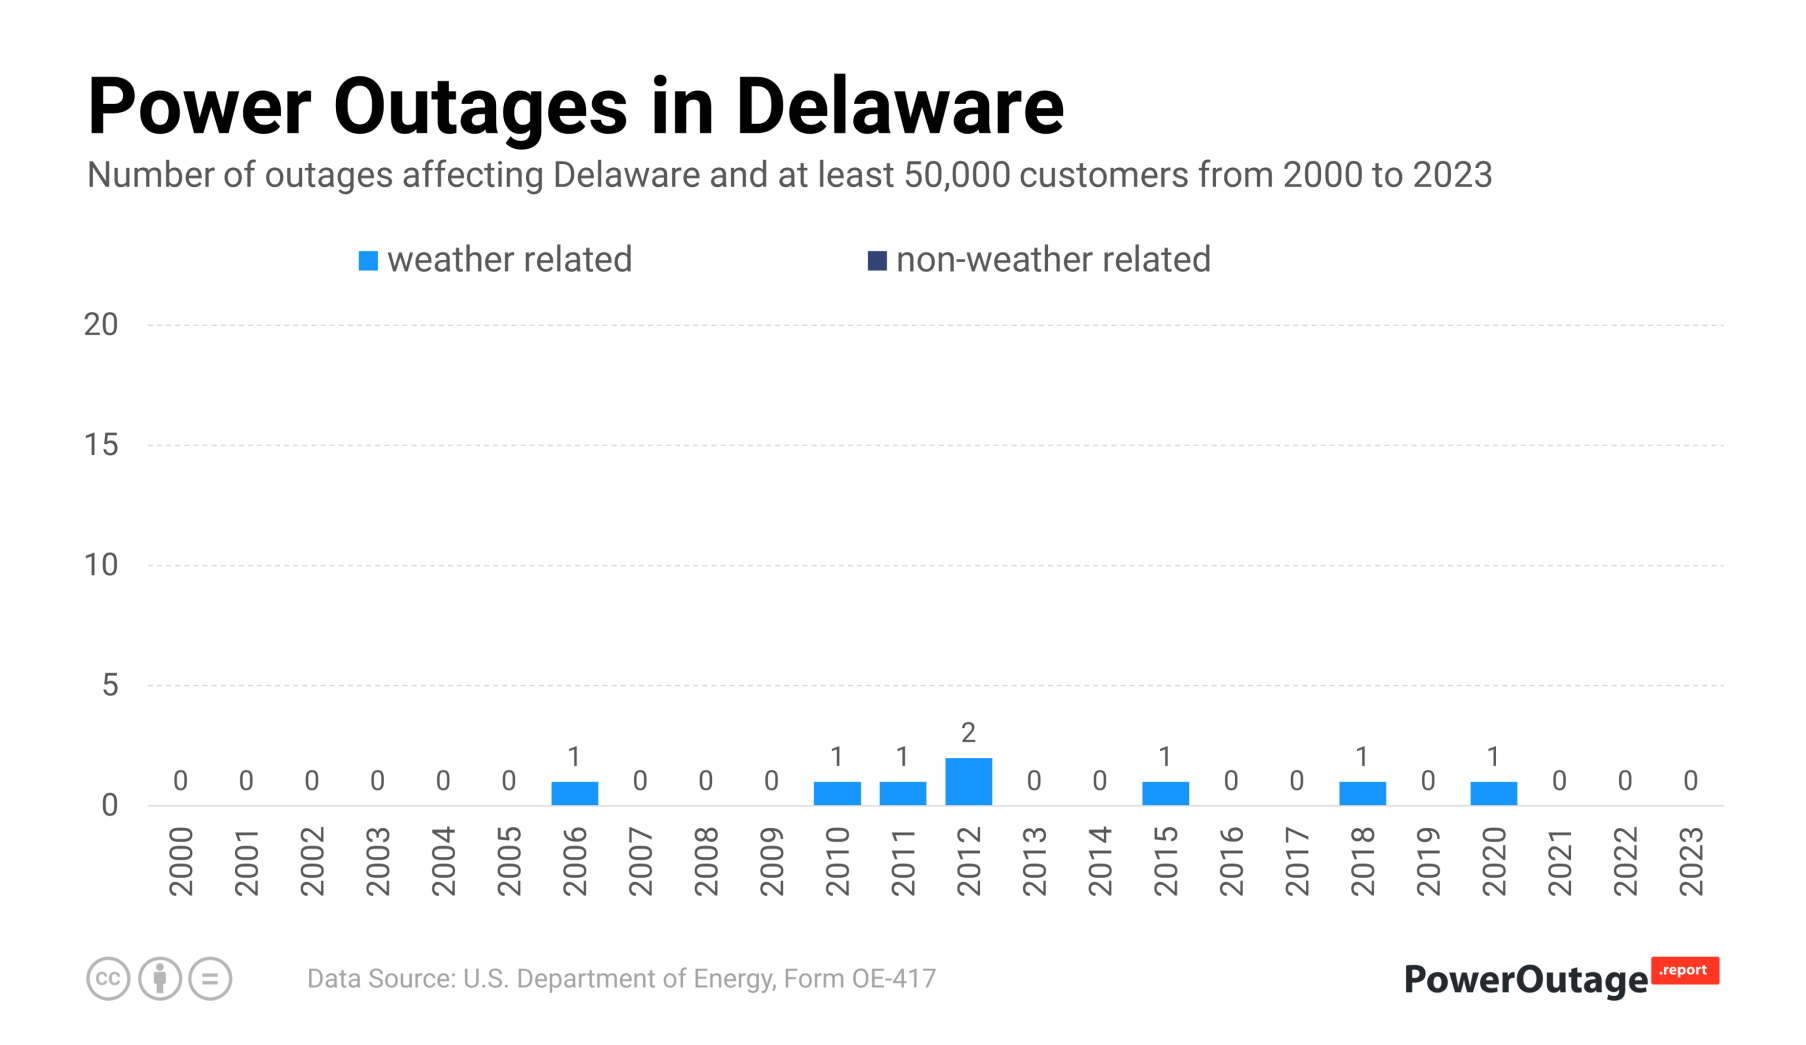 Delaware Power Outage Statistics (2000 - 2022)